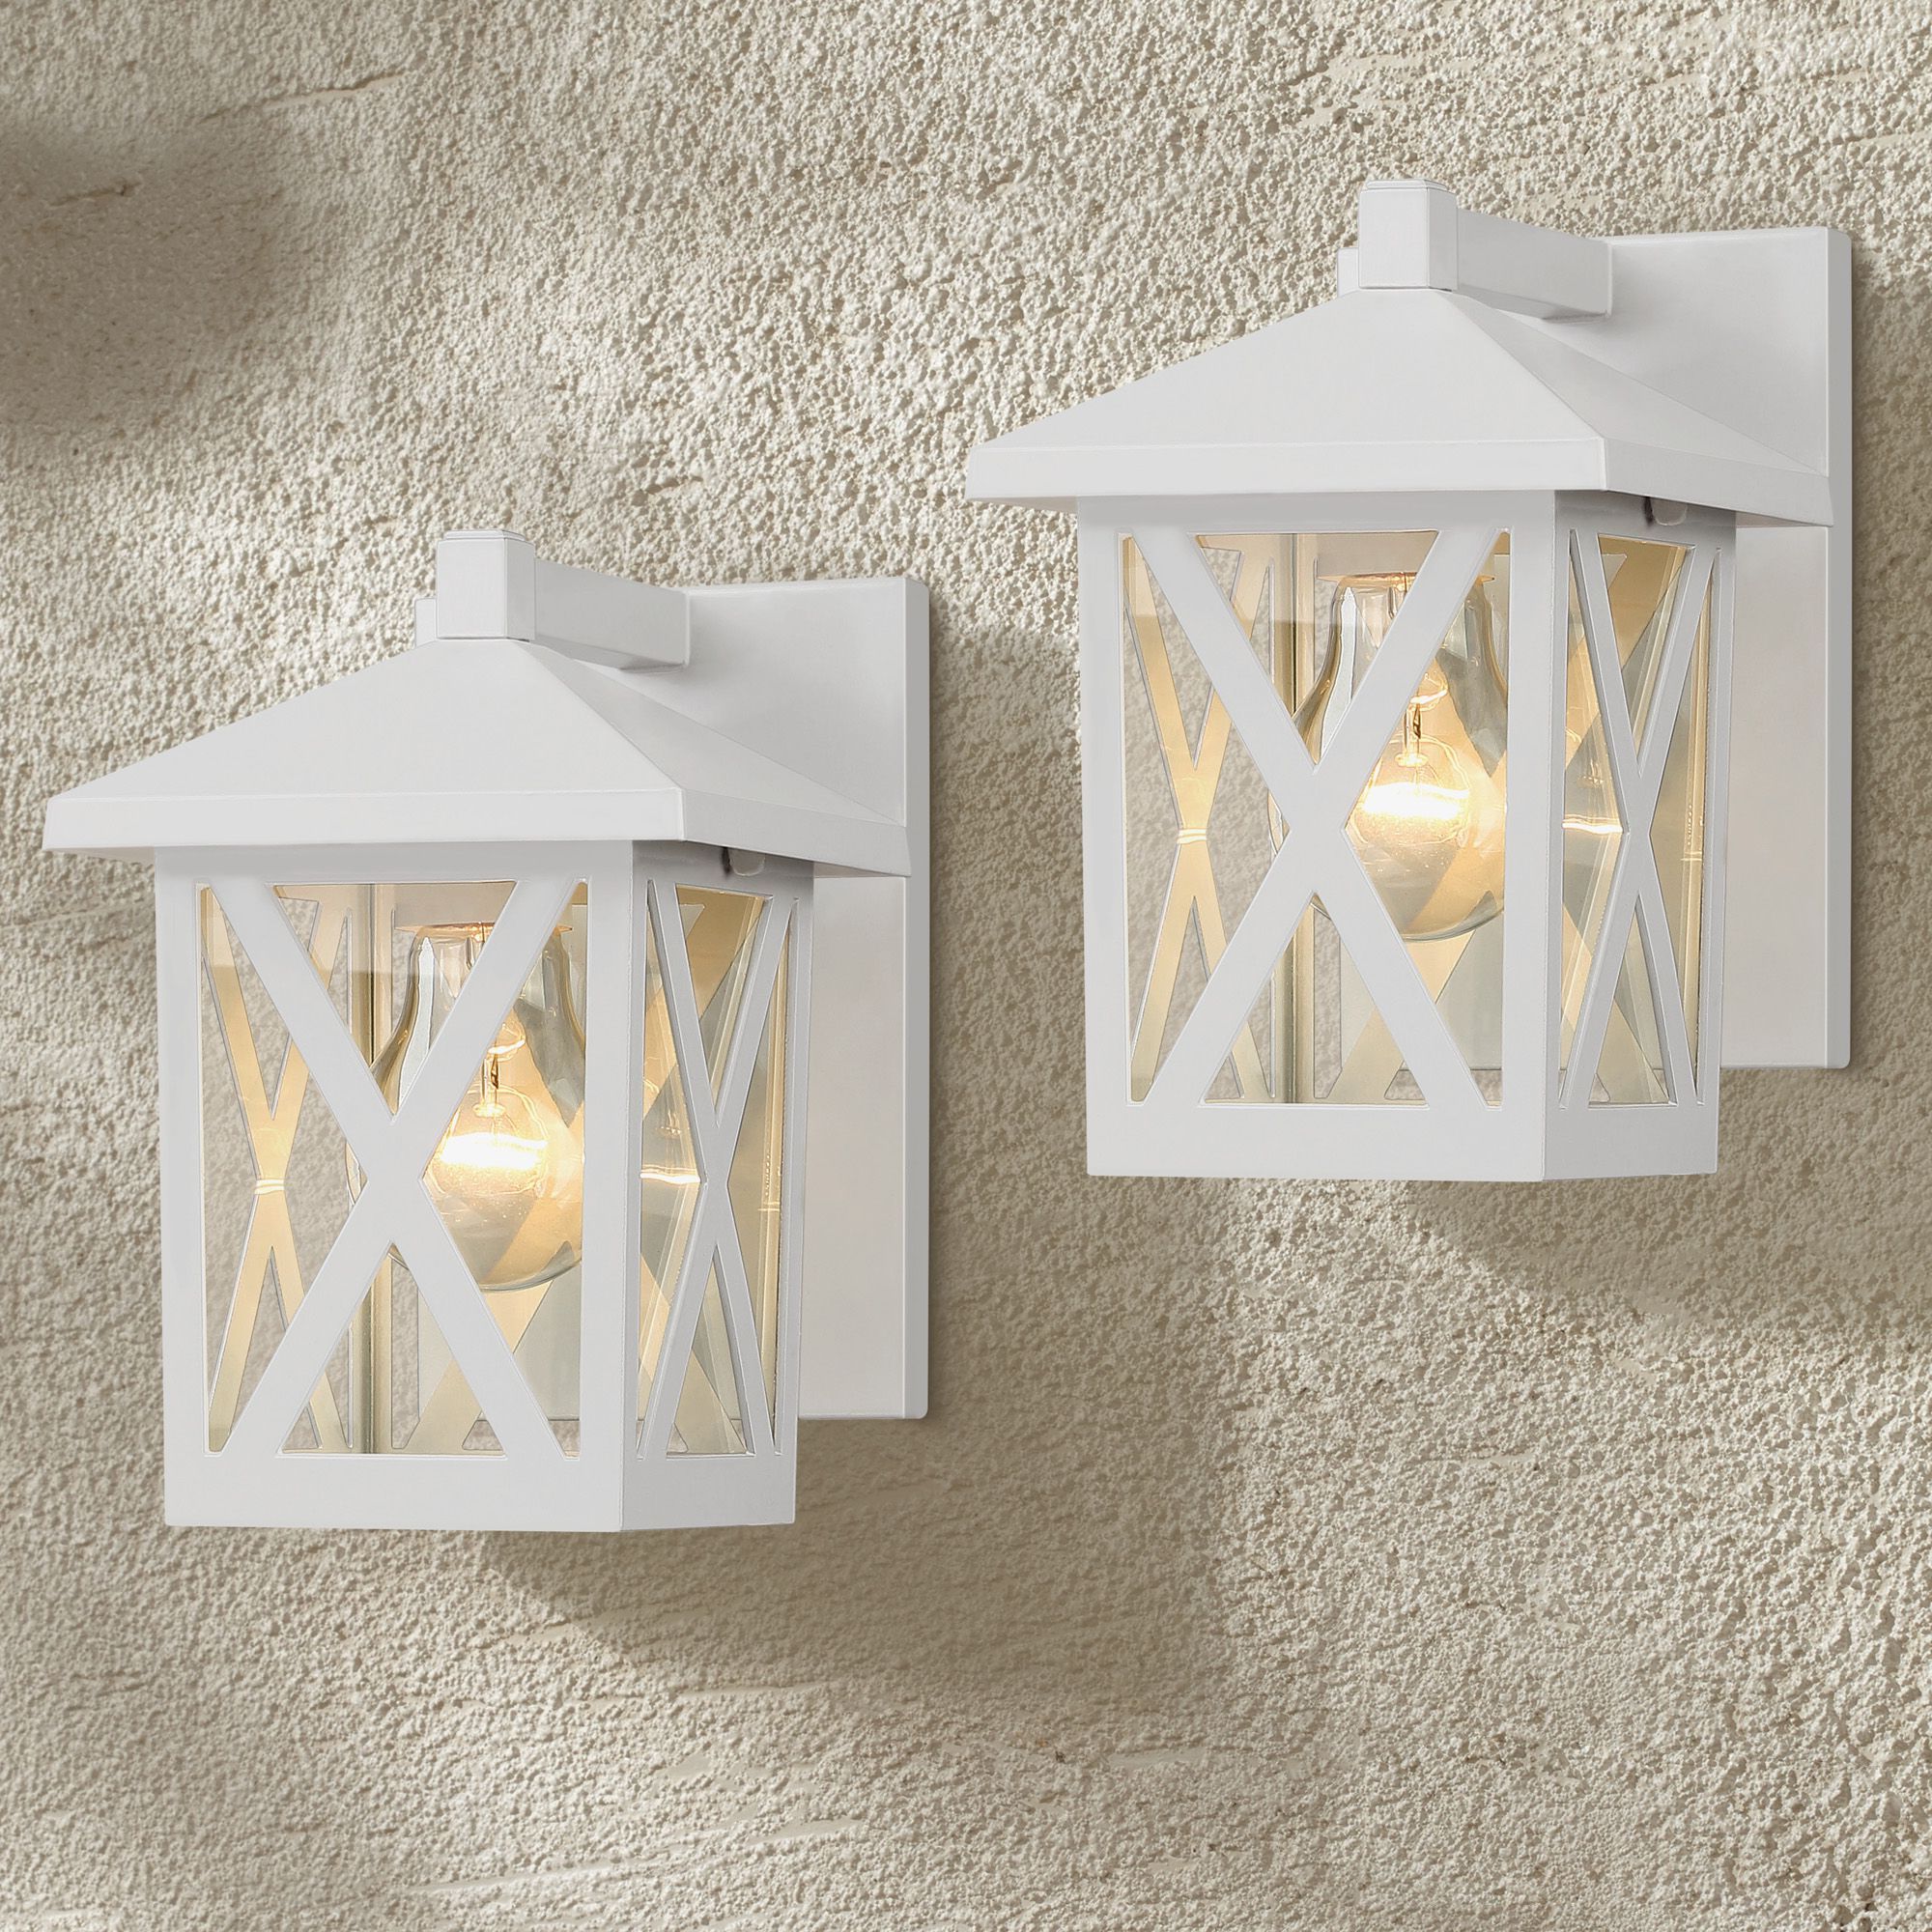 Popular John Timberland Country Cottage Outdoor Wall Light Fixtures Set Of 2 White  7 1/2" Lantern Clear Glass Exterior House Porch Patio – Walmart Pertaining To Cottage White Lantern Chandeliers (View 13 of 15)